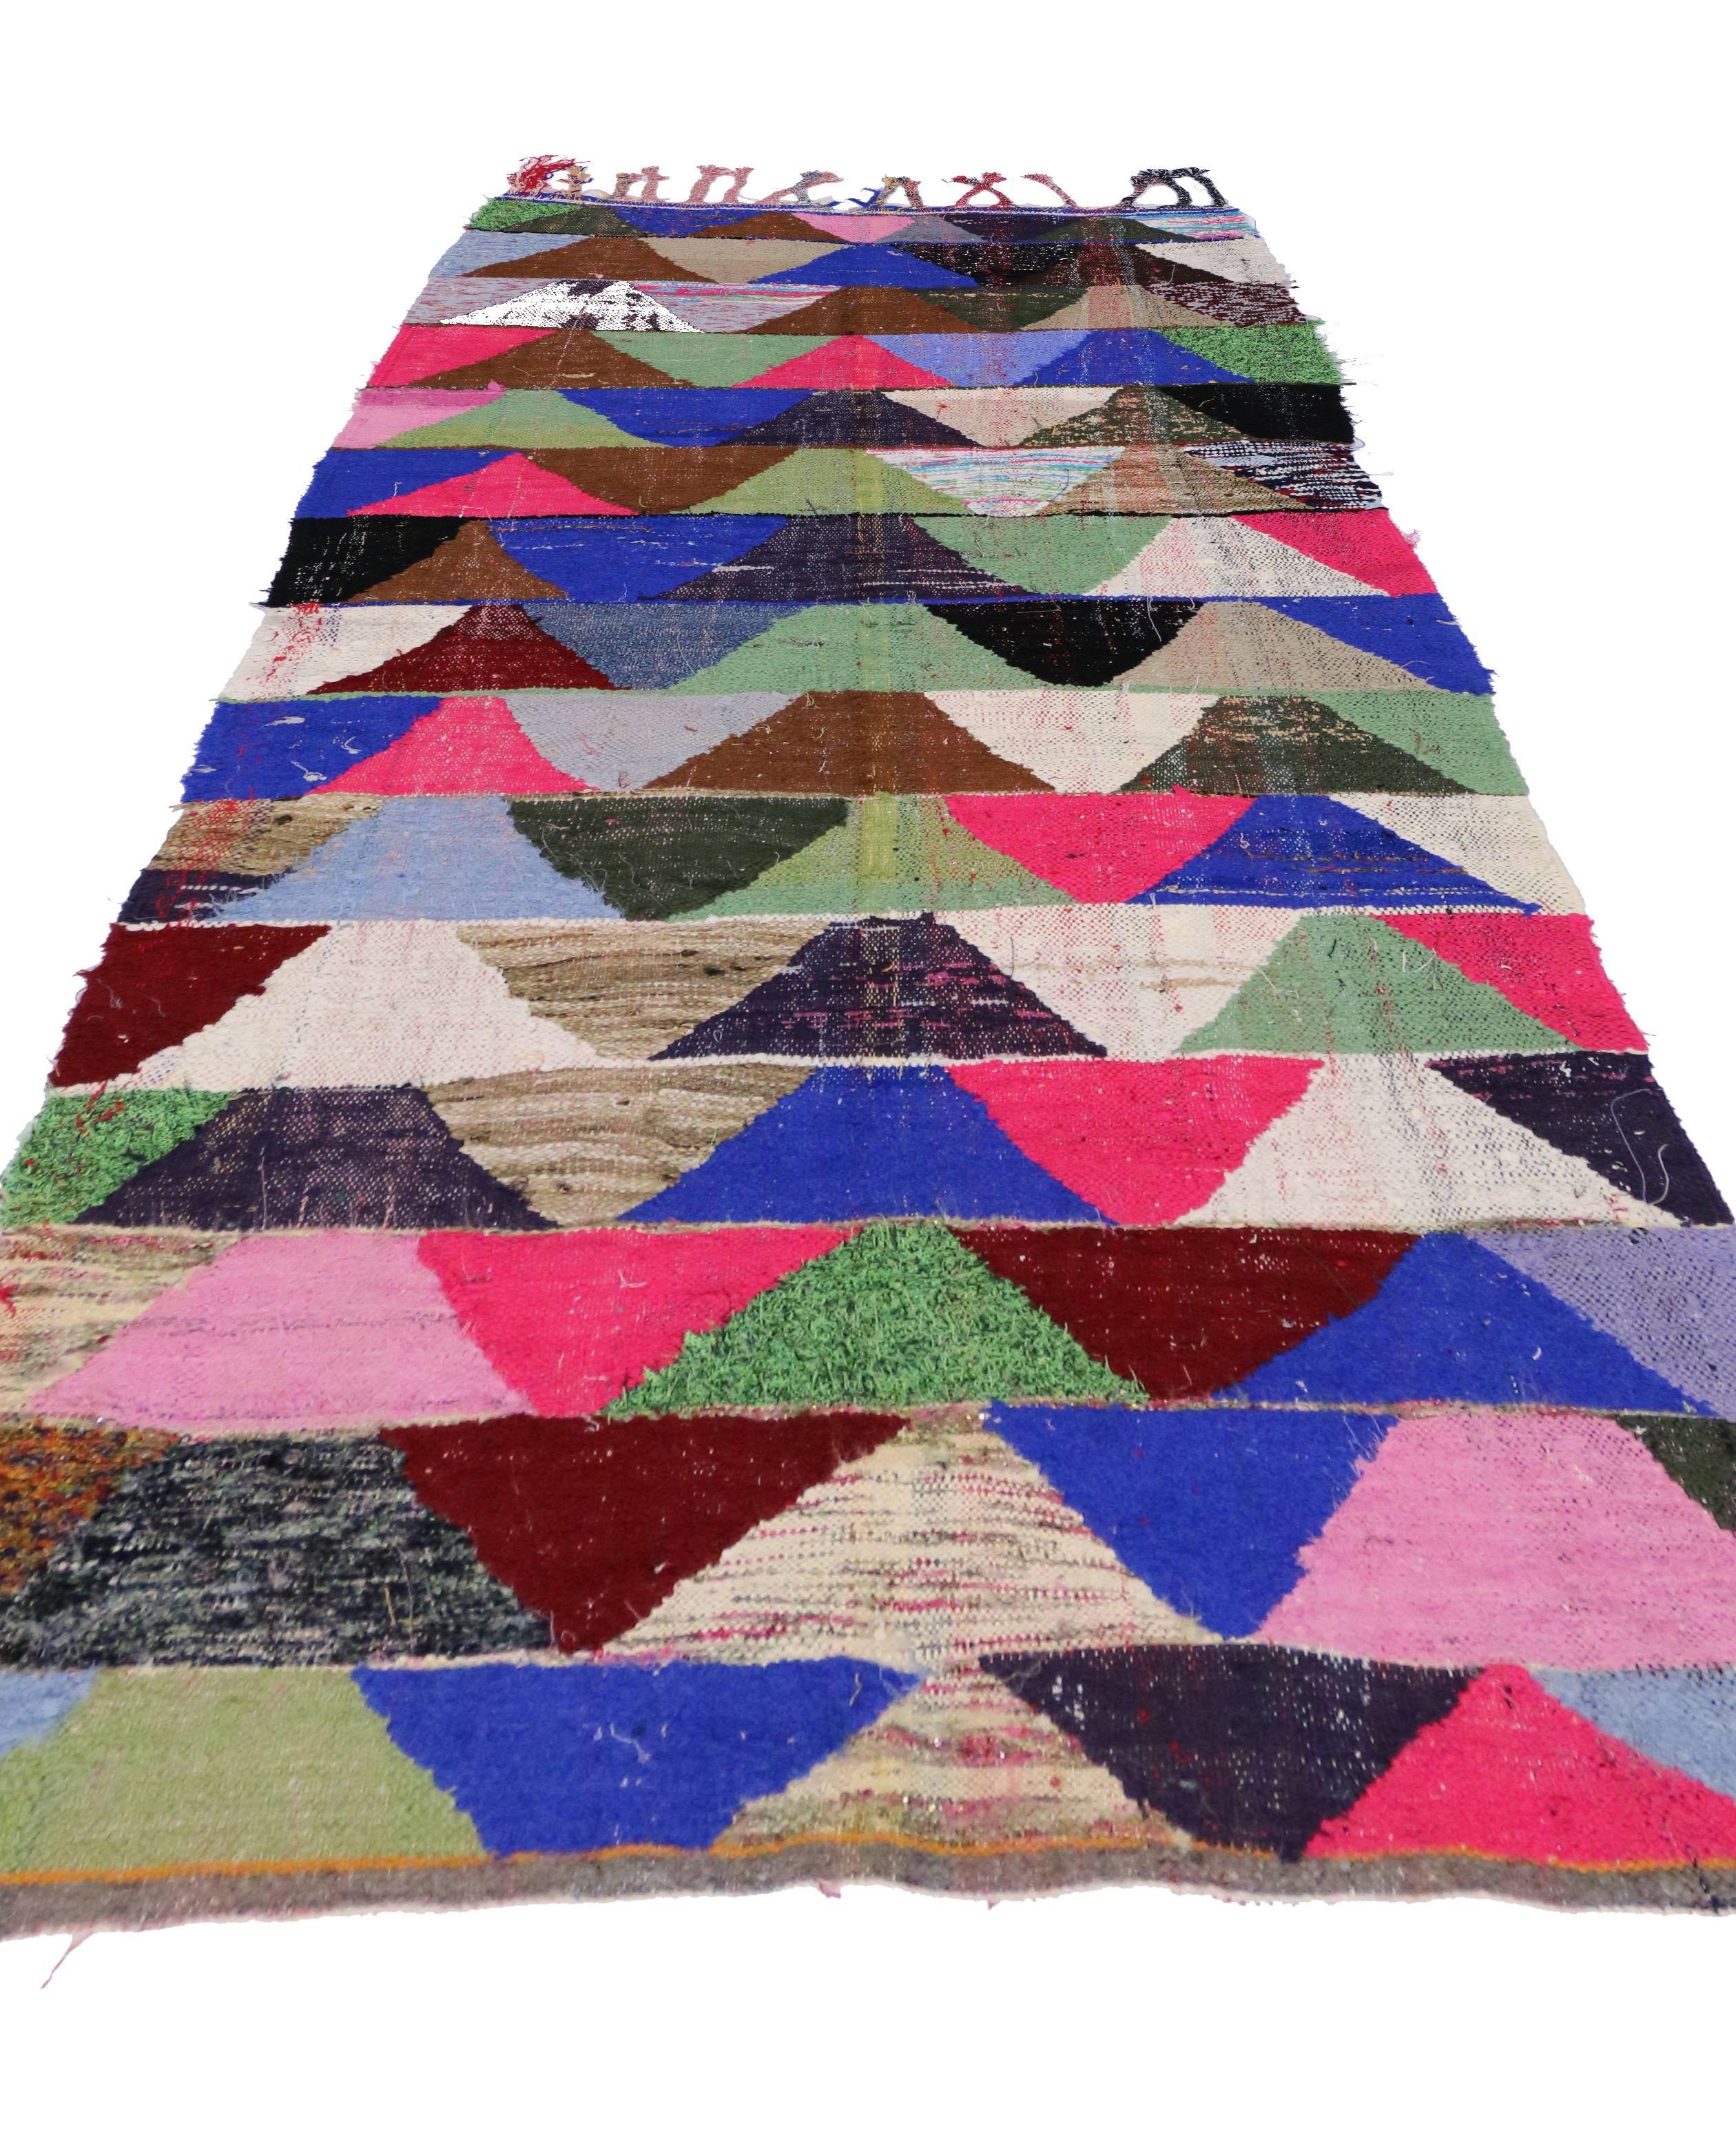 Vintage Berber Moroccan Rug with Colorful Contemporary Abstract Style 1